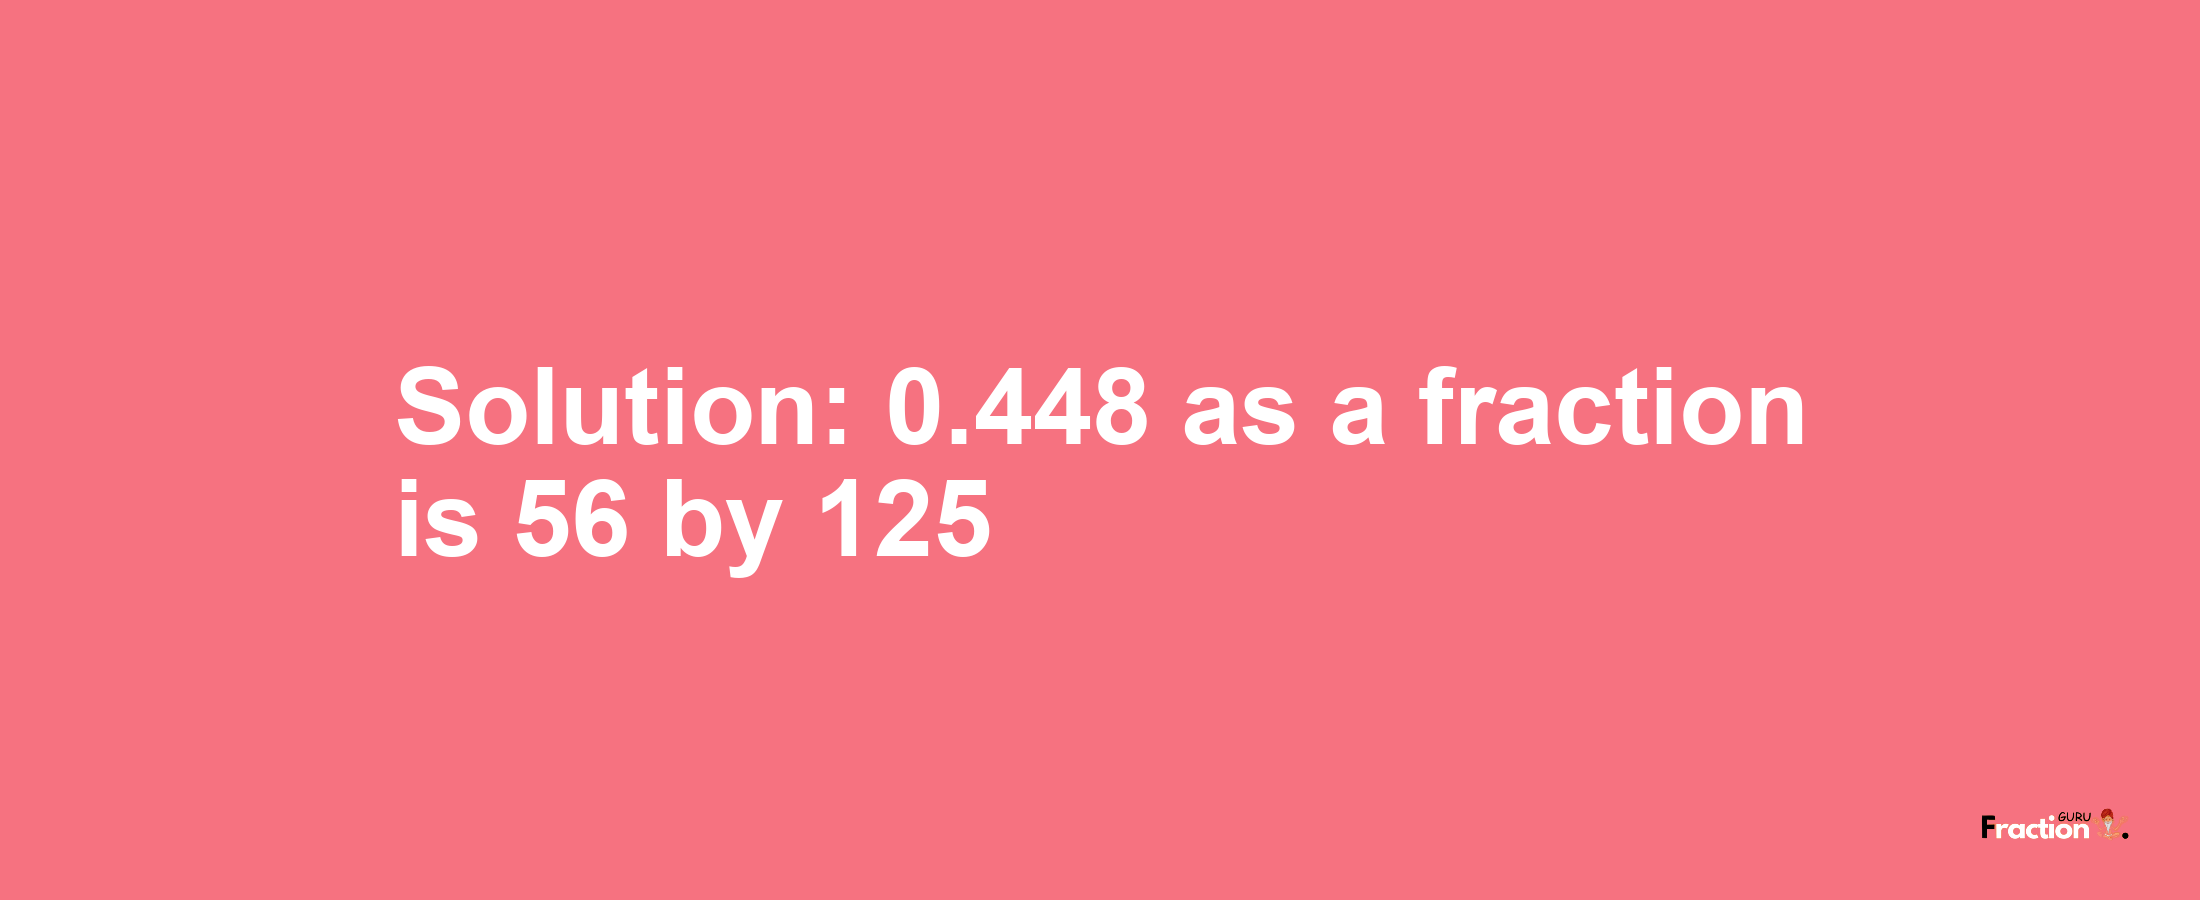 Solution:0.448 as a fraction is 56/125